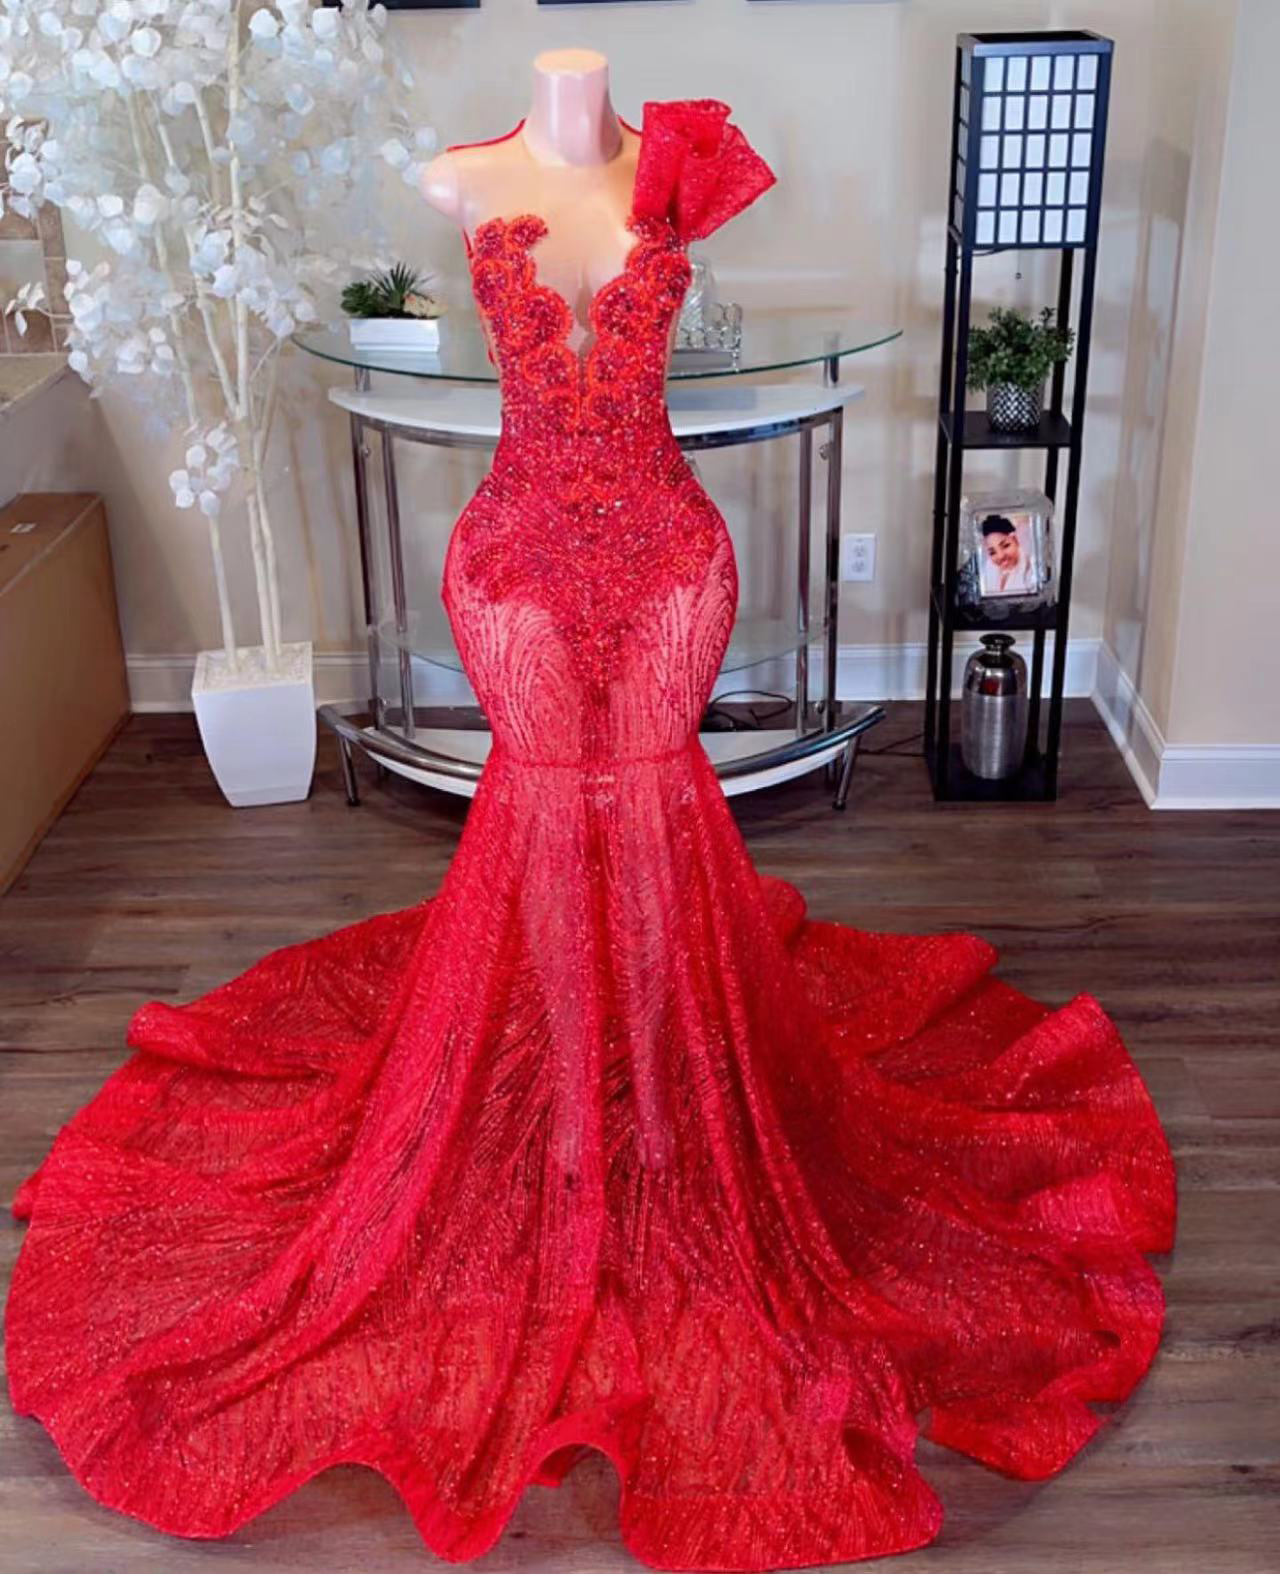 Red Sparkly Prom Dresses Crystal Sequins Beading Mermaid Illusion Crew Neckline Formal Evening Dresses Glitter Tight Women's Party